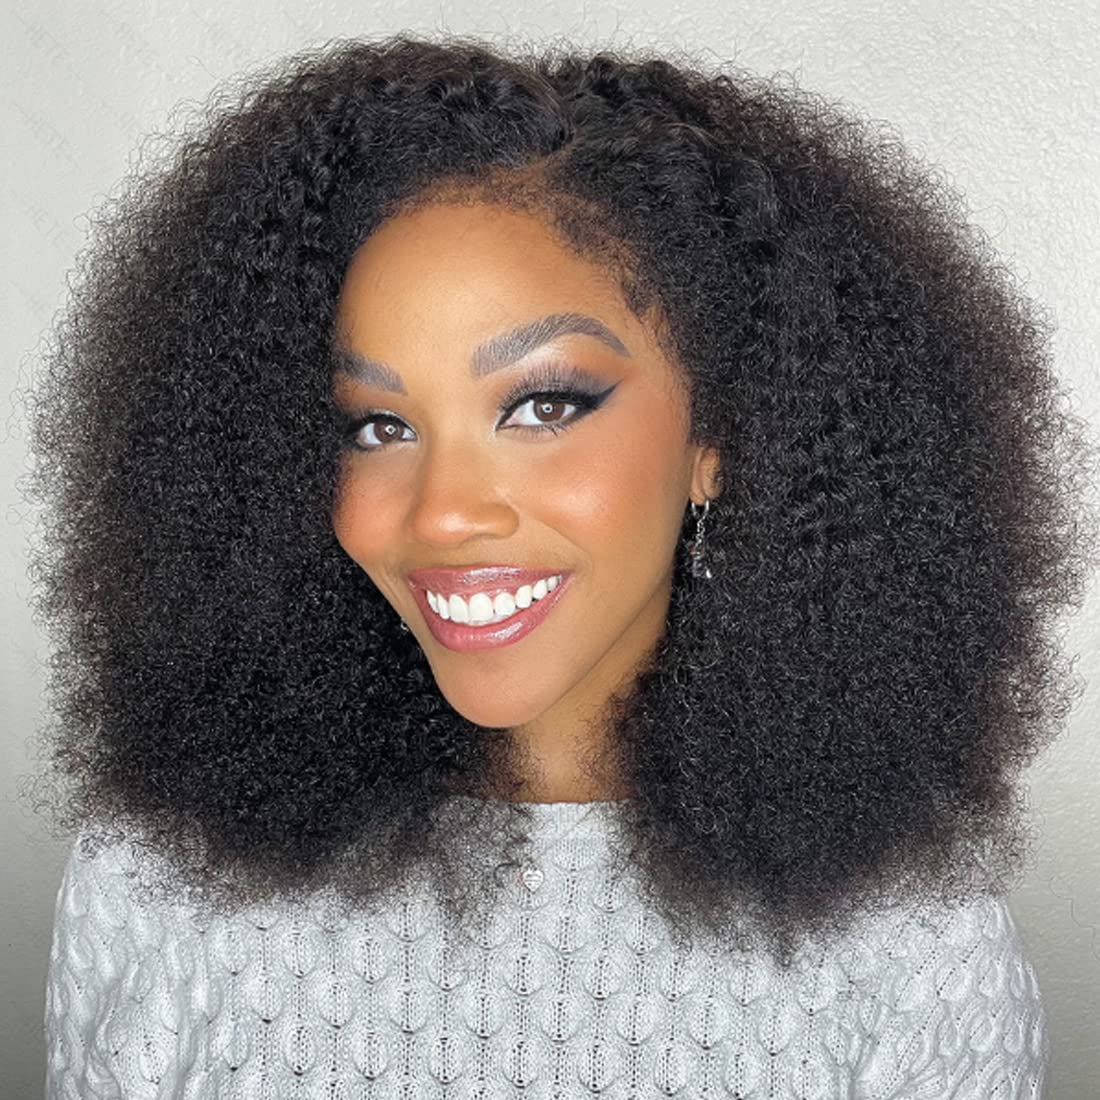 

Afro Kinky Curly Glueless Full Lace Wig Frontal Wigs Density 130% 150% 180% Wig for Black Women Bobby Pre Plucked Brazilian Human Virgin Hair Goals Greatremy SALE, Natural color